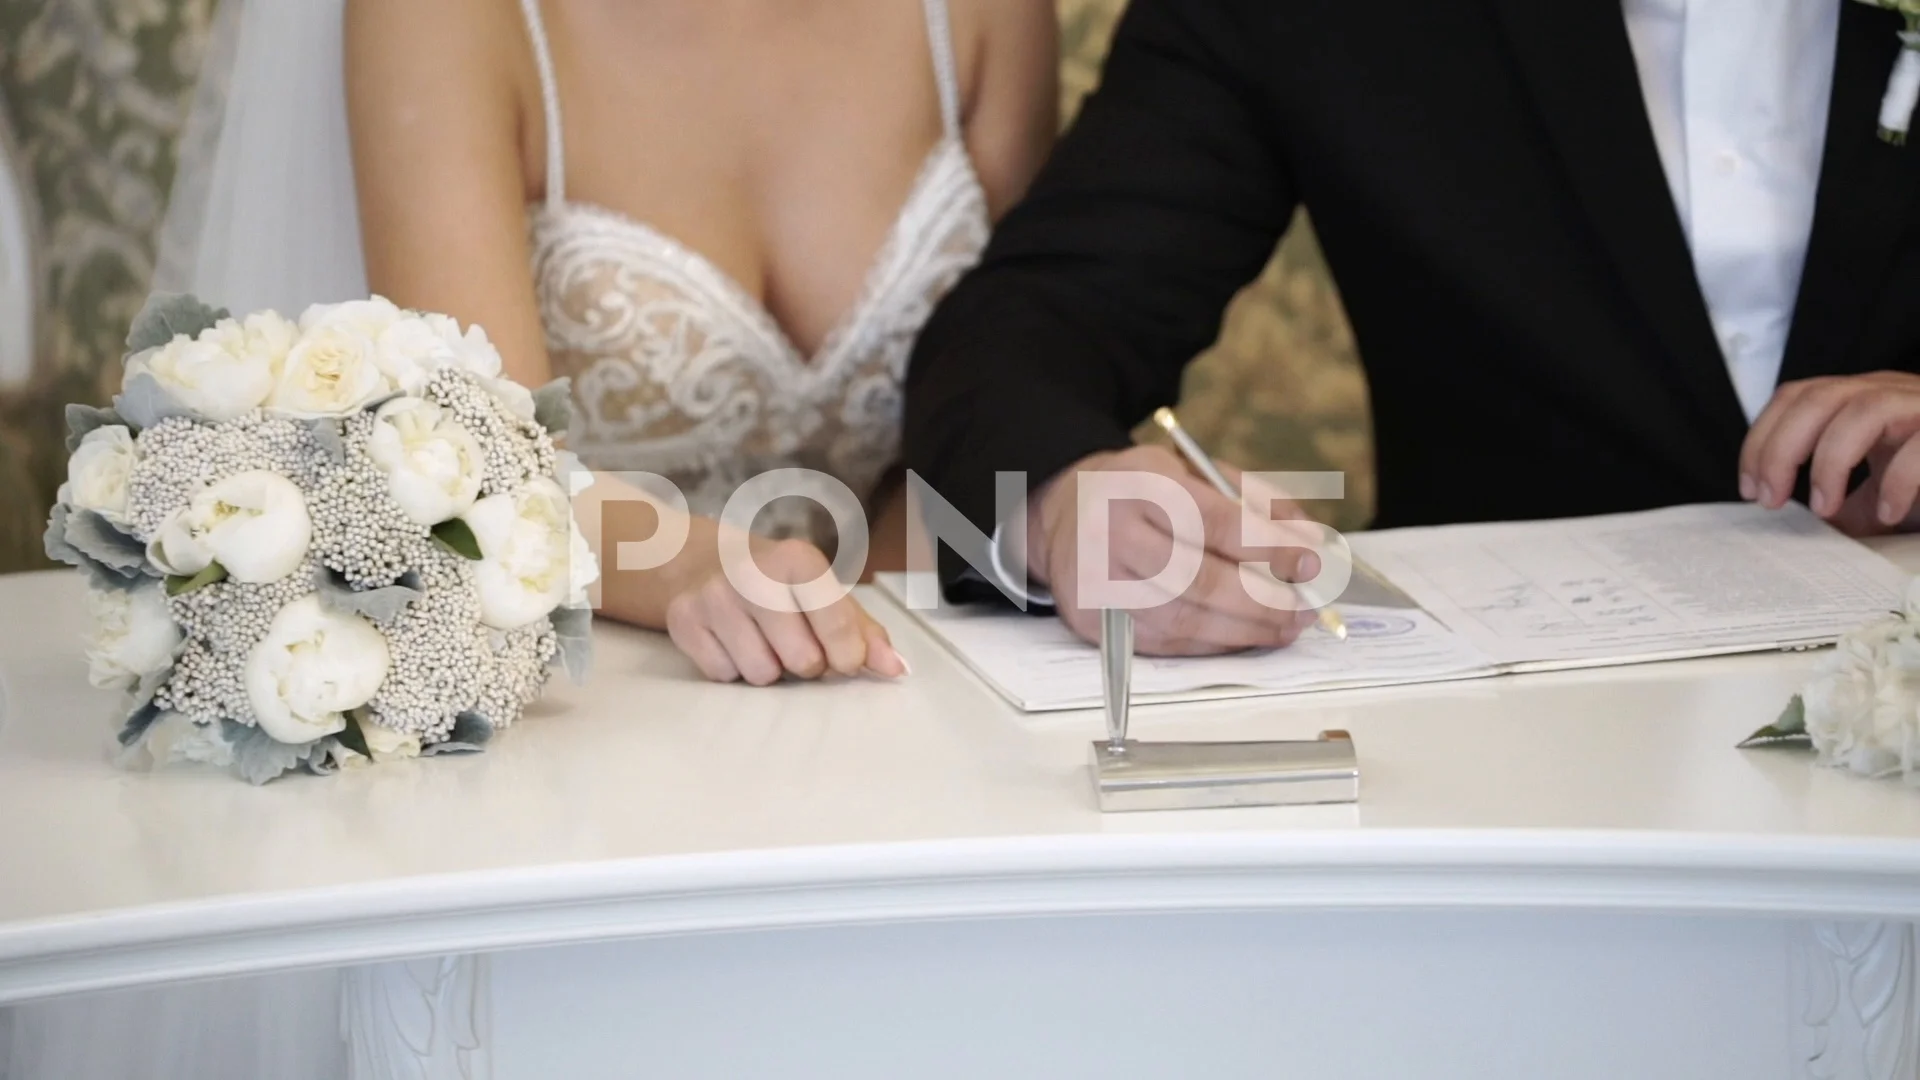 Bride documents that belonged to